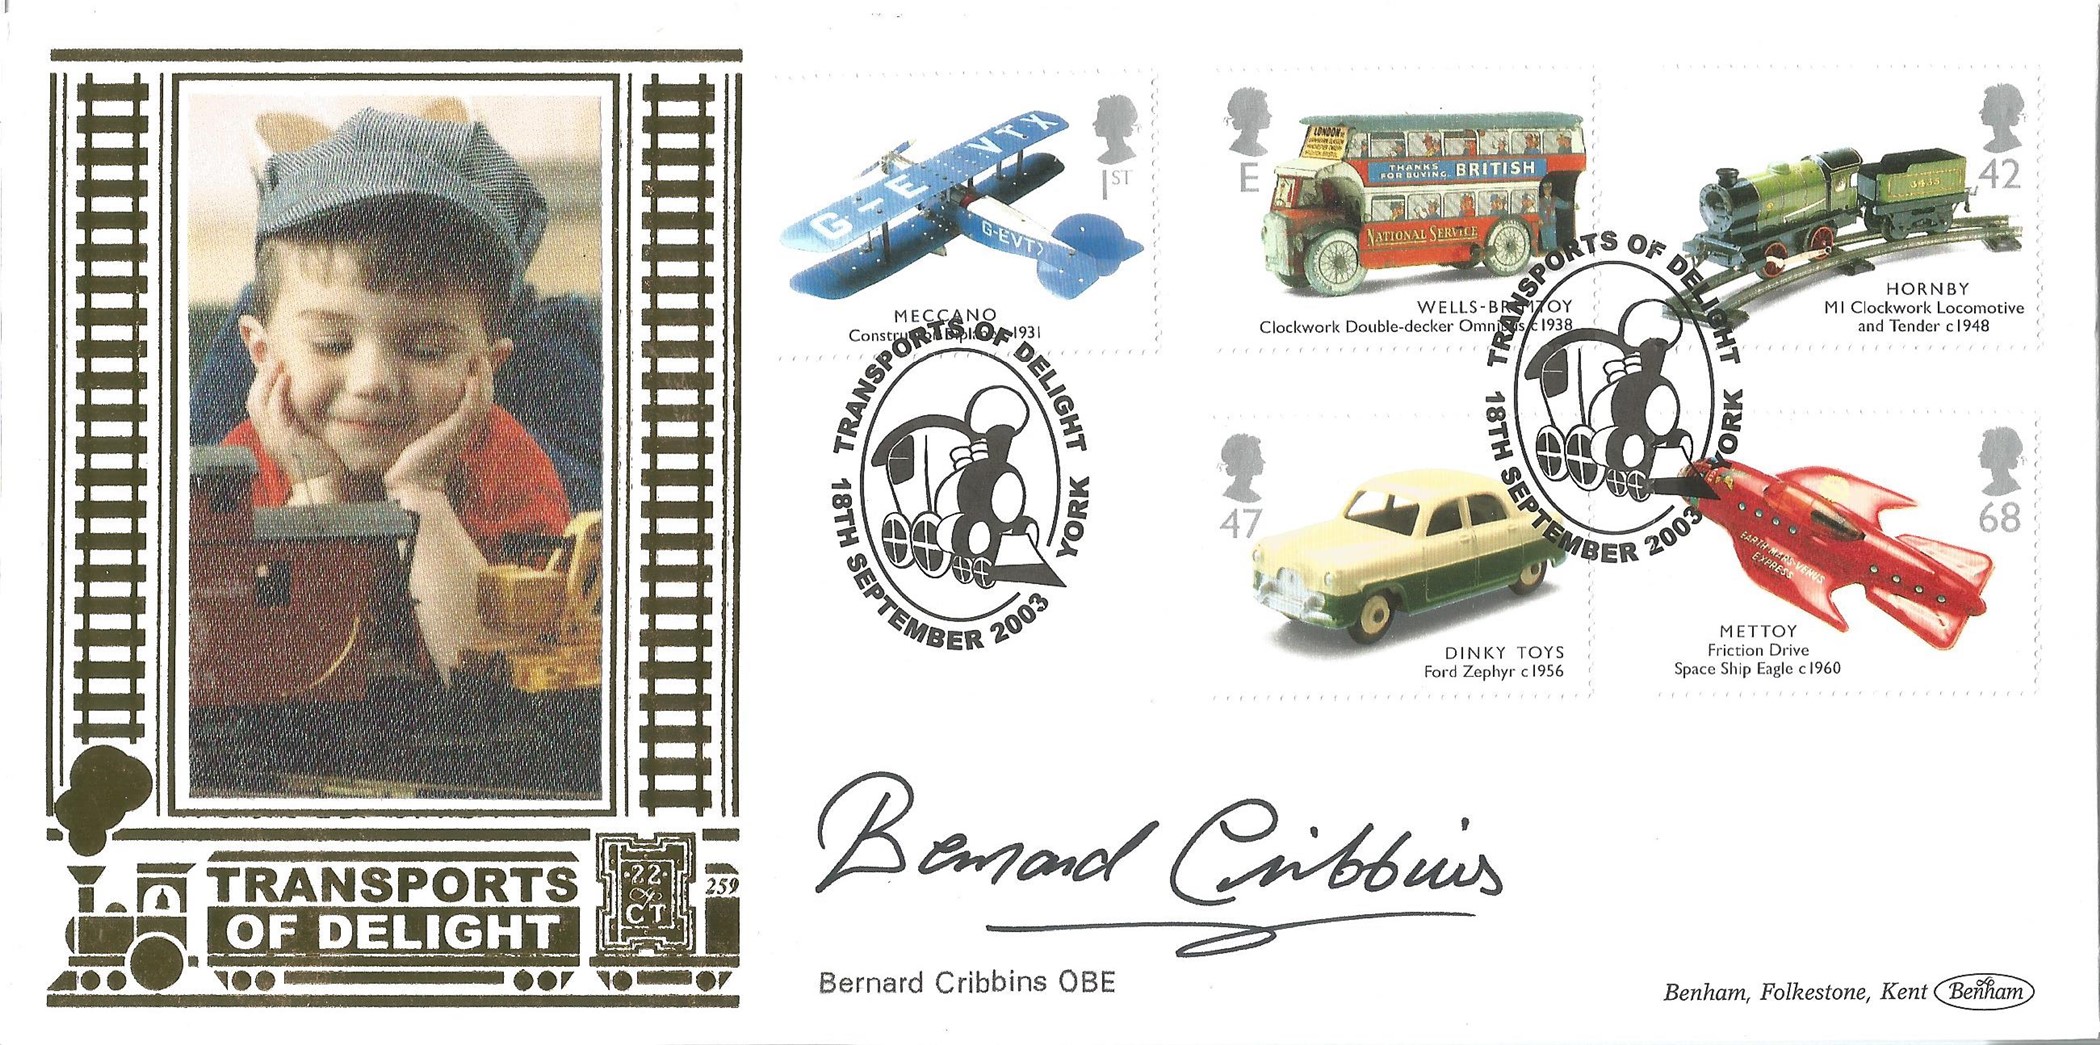 Bernard Cribbins signed Transports of Delight FDC.Good condition. All autographs come with a